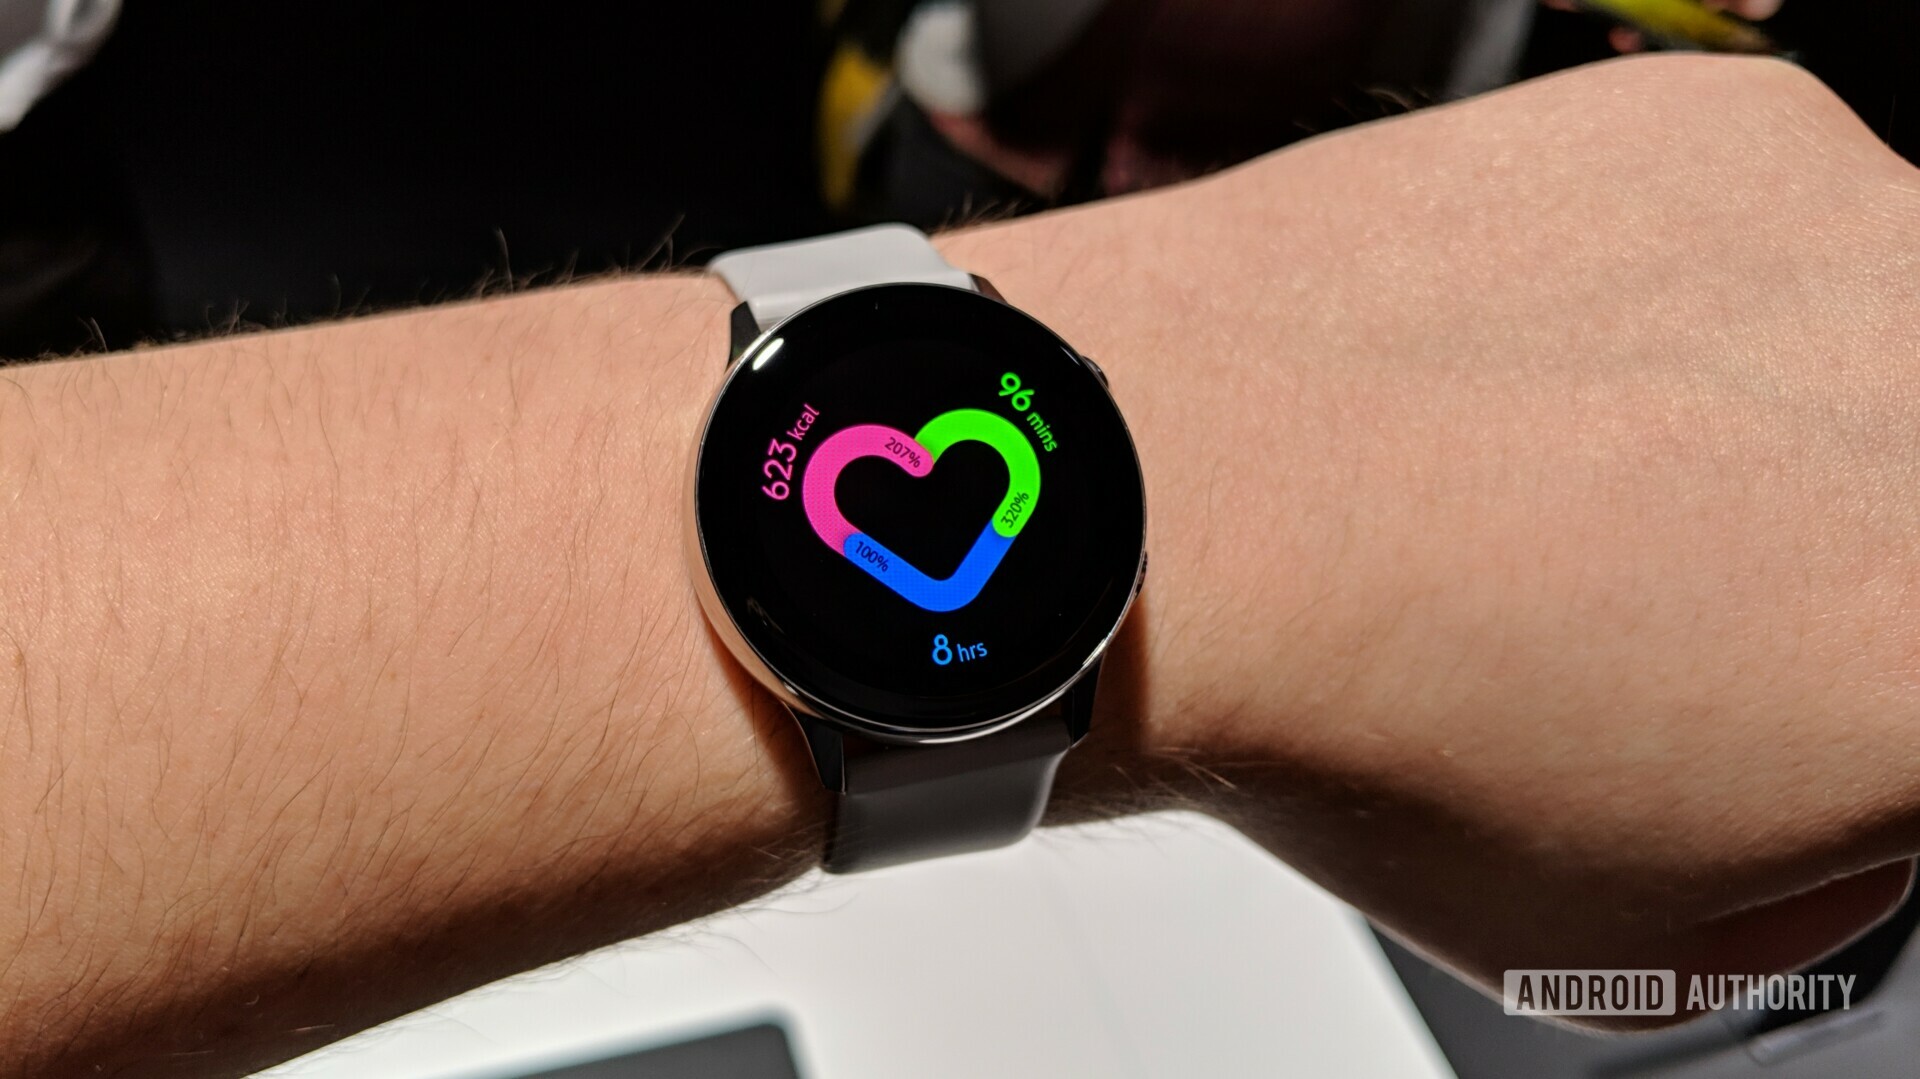 Photo of the Samsung Galaxy Watch Active placed on a hand.